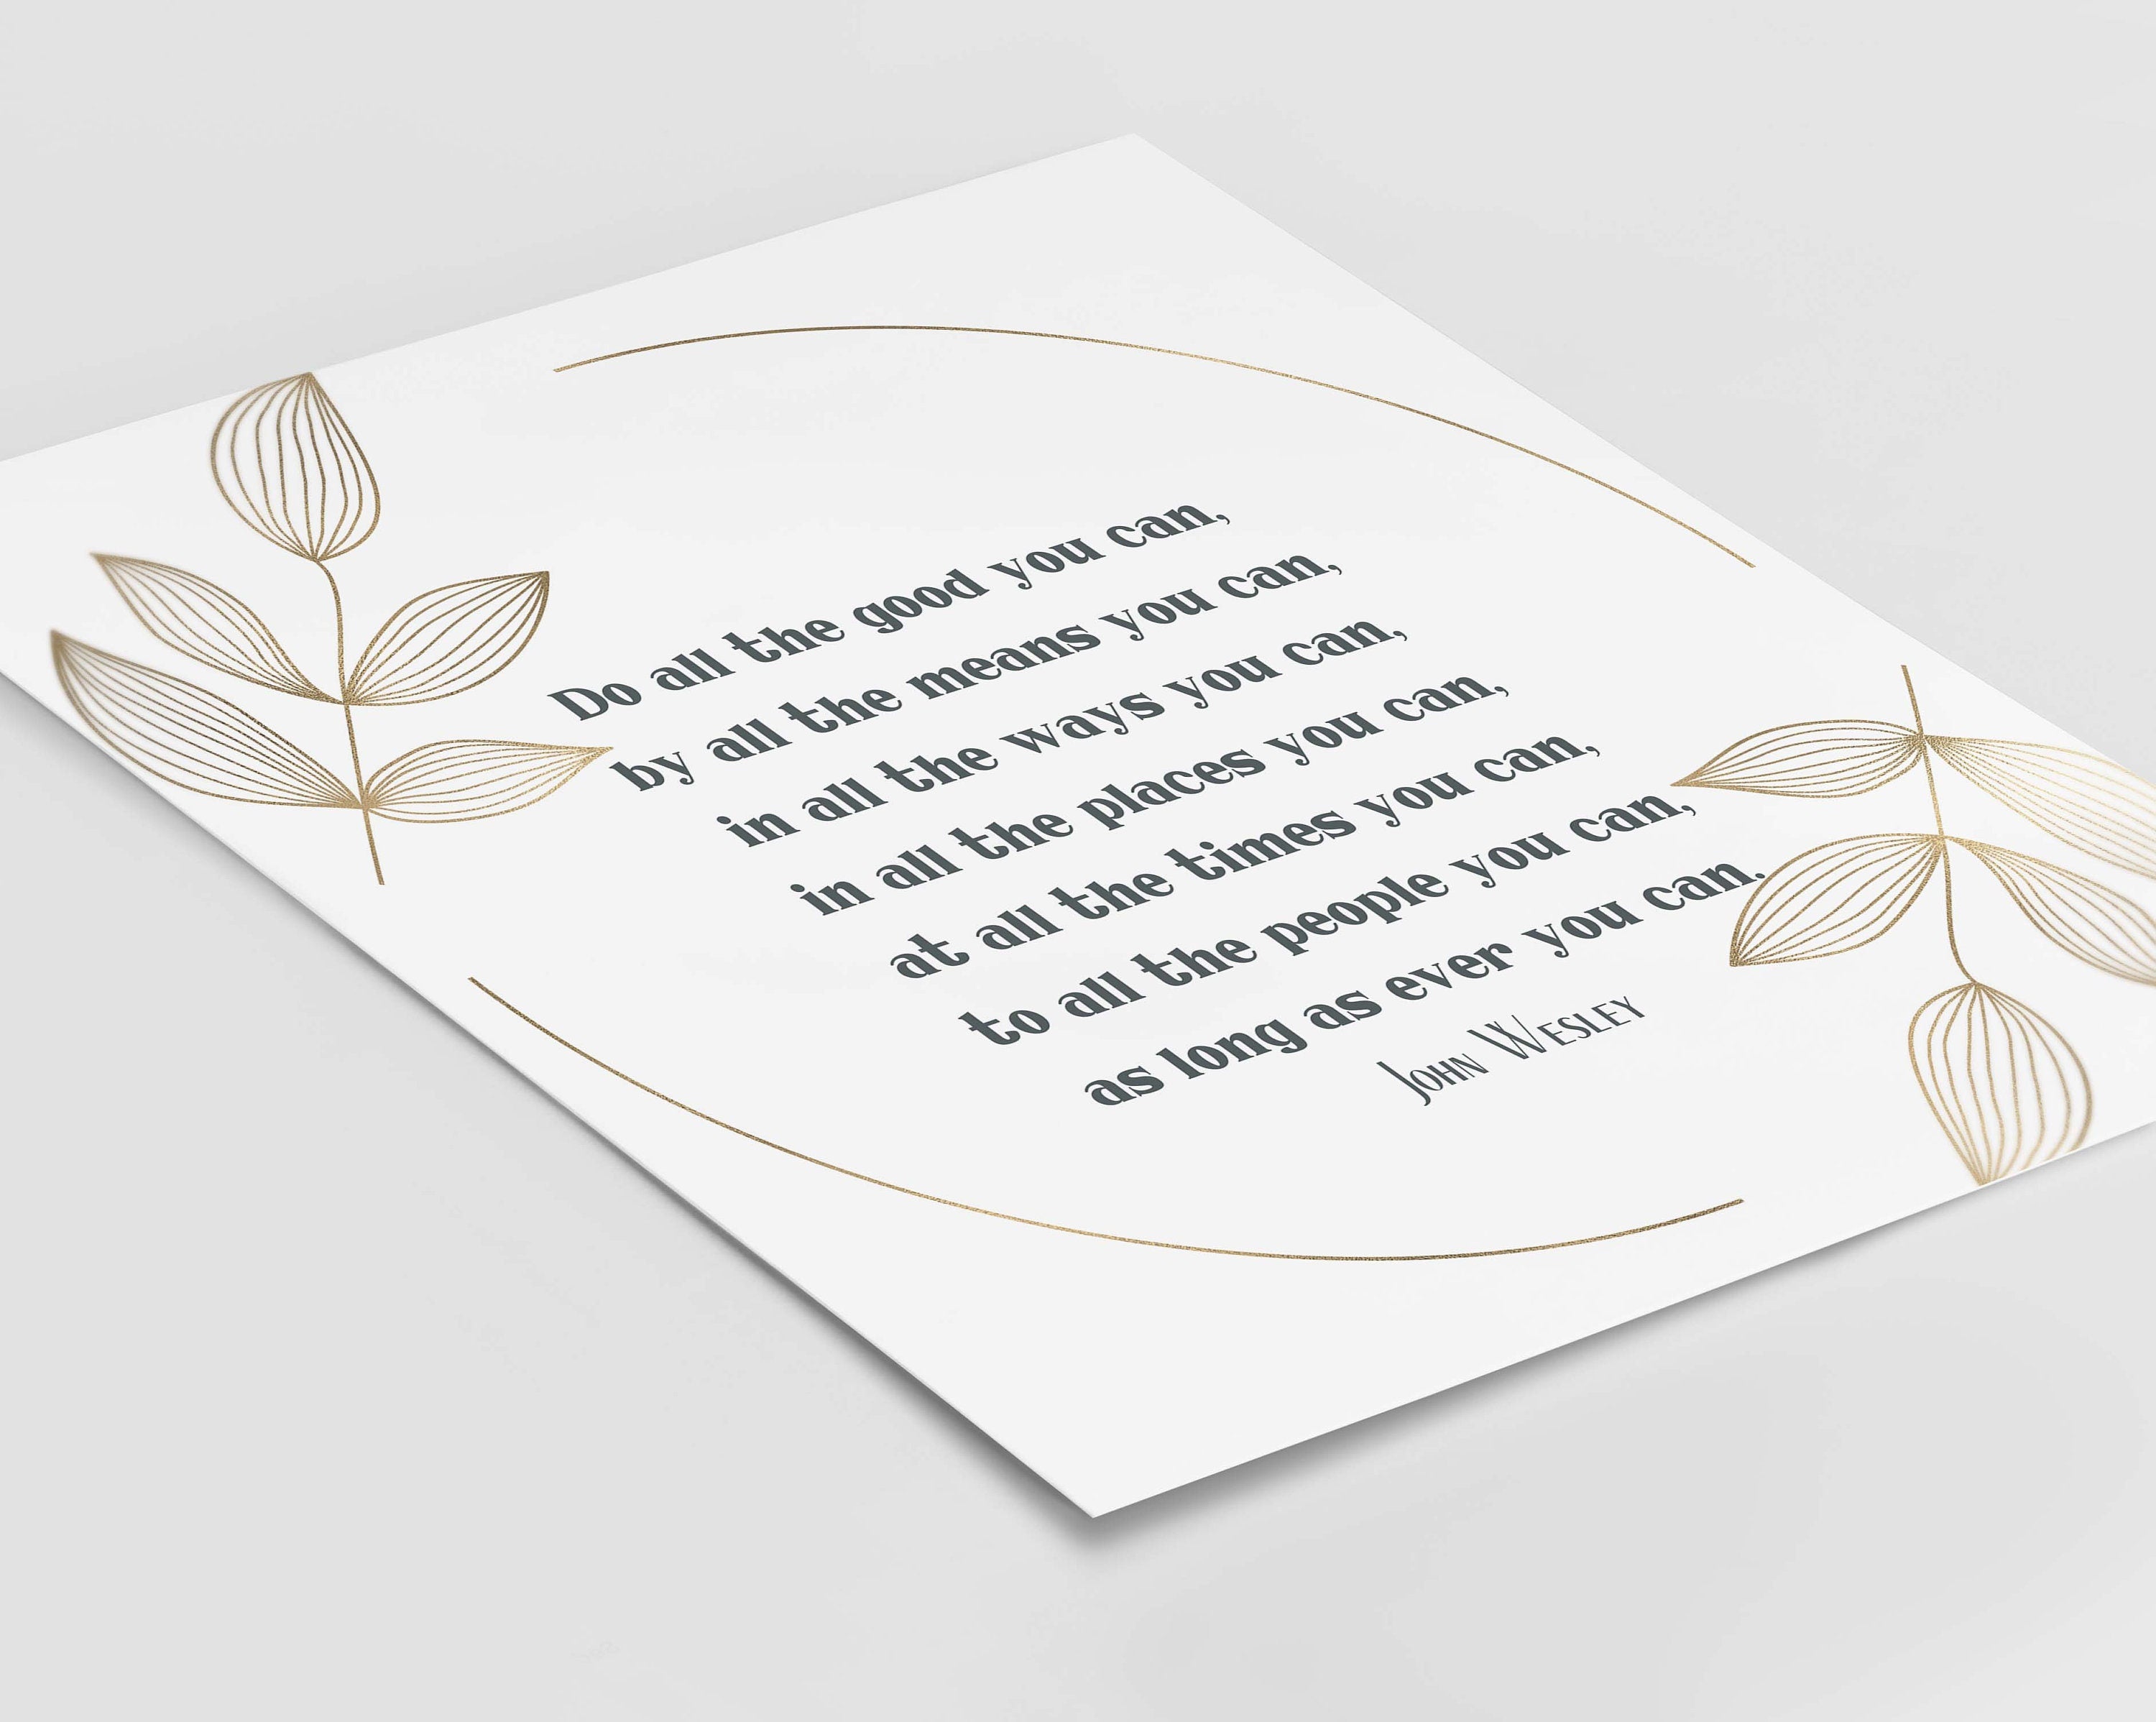 Do All The Good You Can Quote Print in Grey White and Gold, John Wesley Inspirational Quote Wall Art Print Unframed or Framed